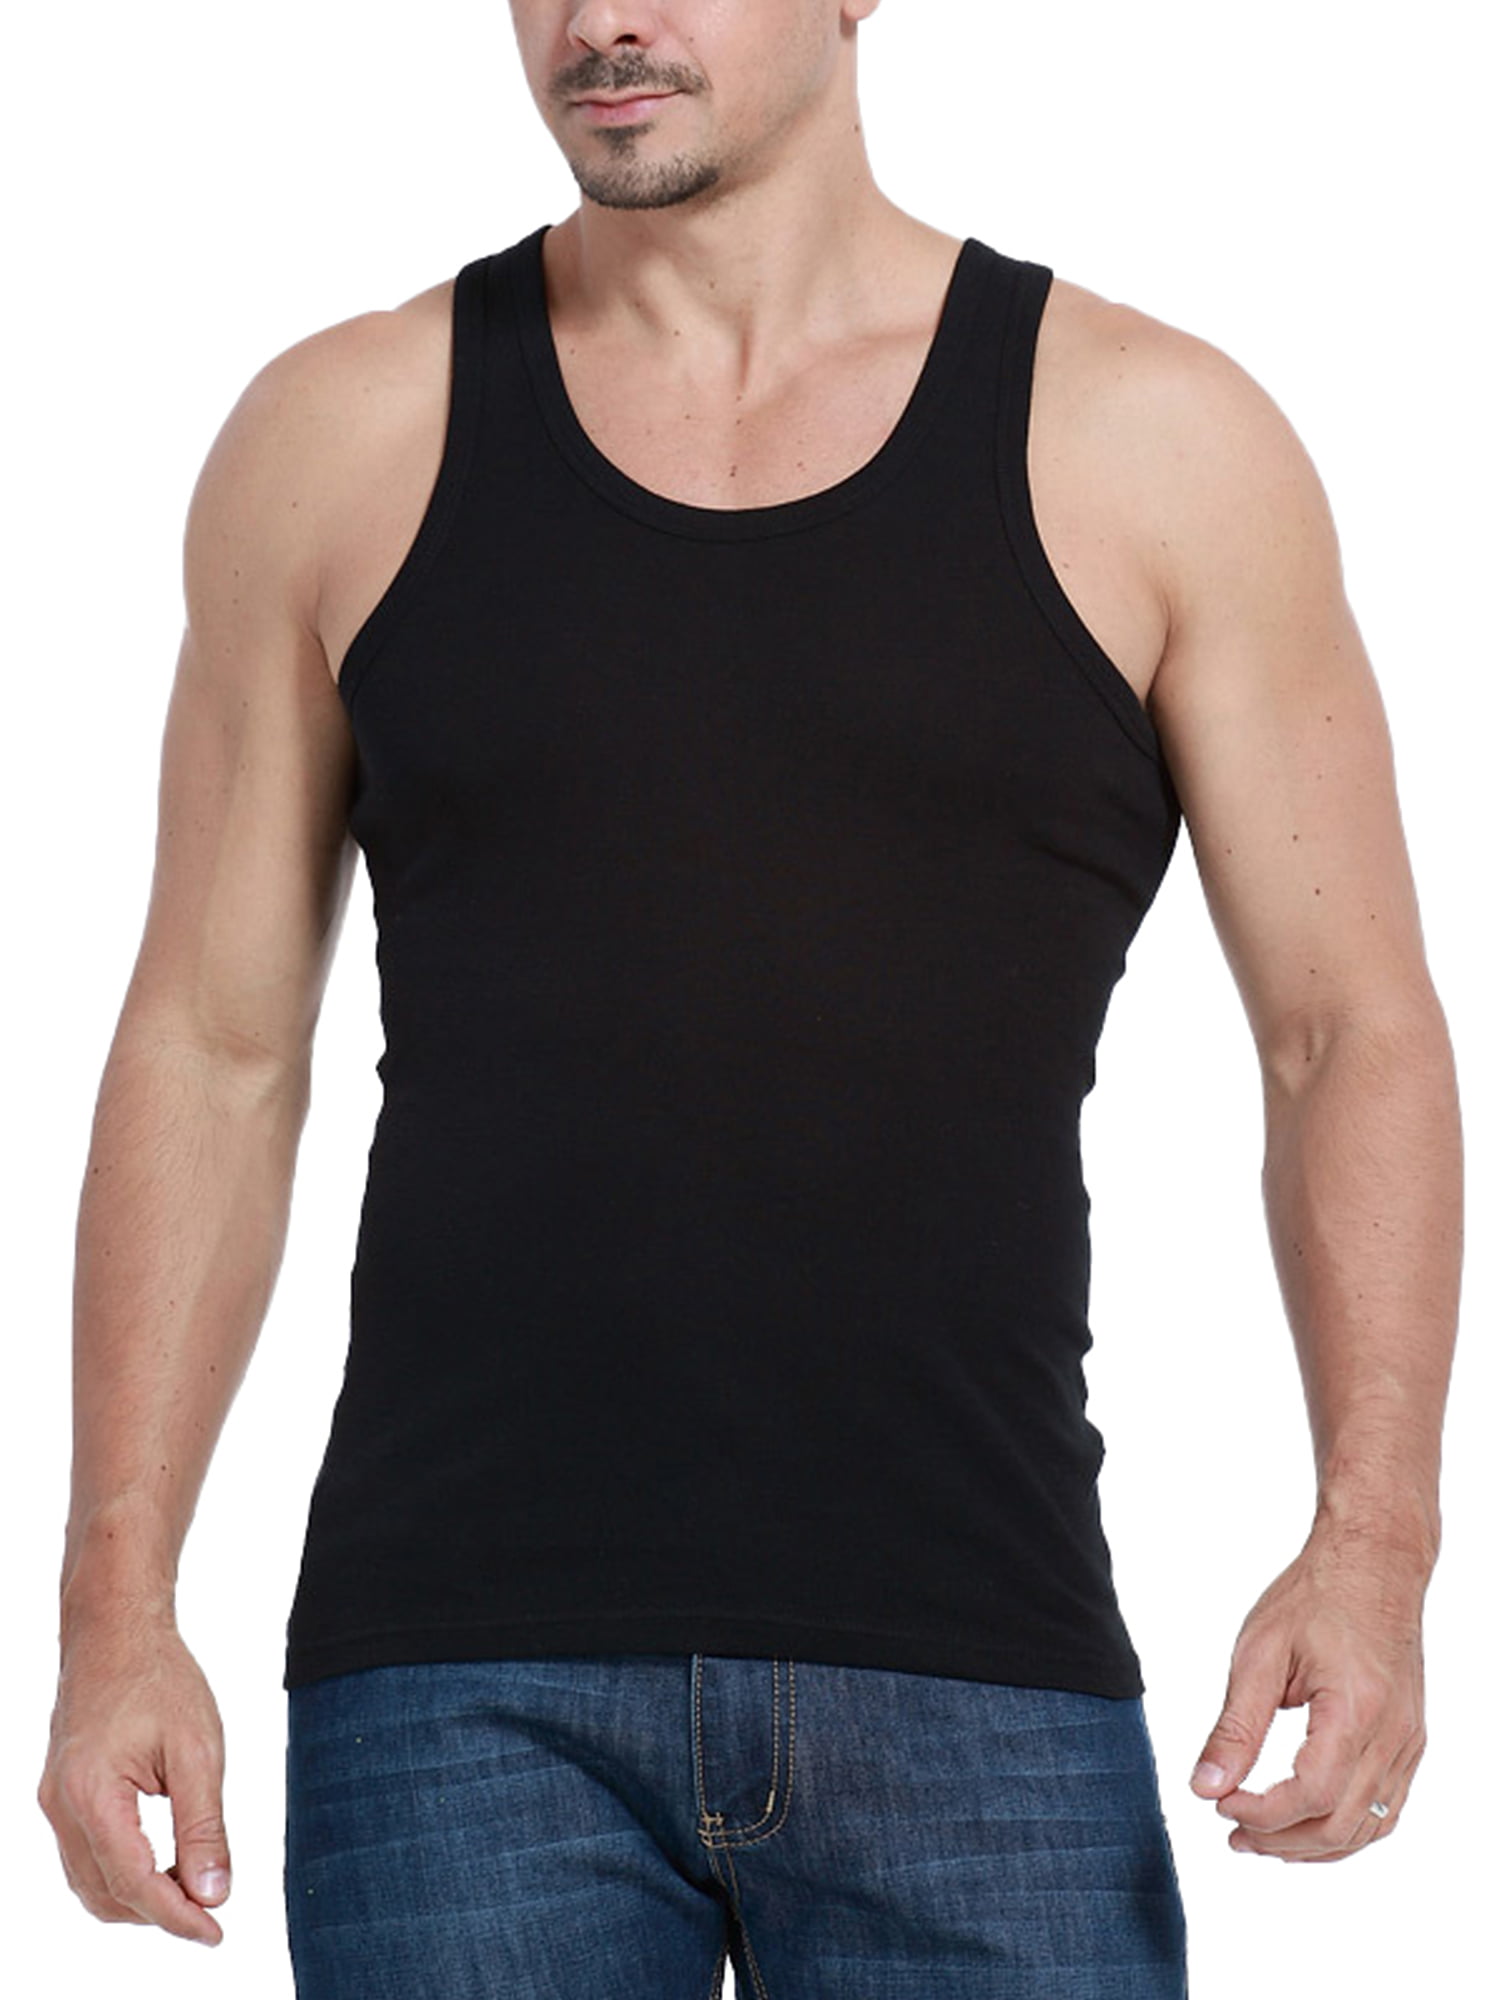 Hot!Men Tops Plus Size New Style O-Neck Solid Slim Comfortable Sleeveless Shirts Outdoor Leisure Sports Fitness Breathable Running Vest Top Blouse T-Shirt